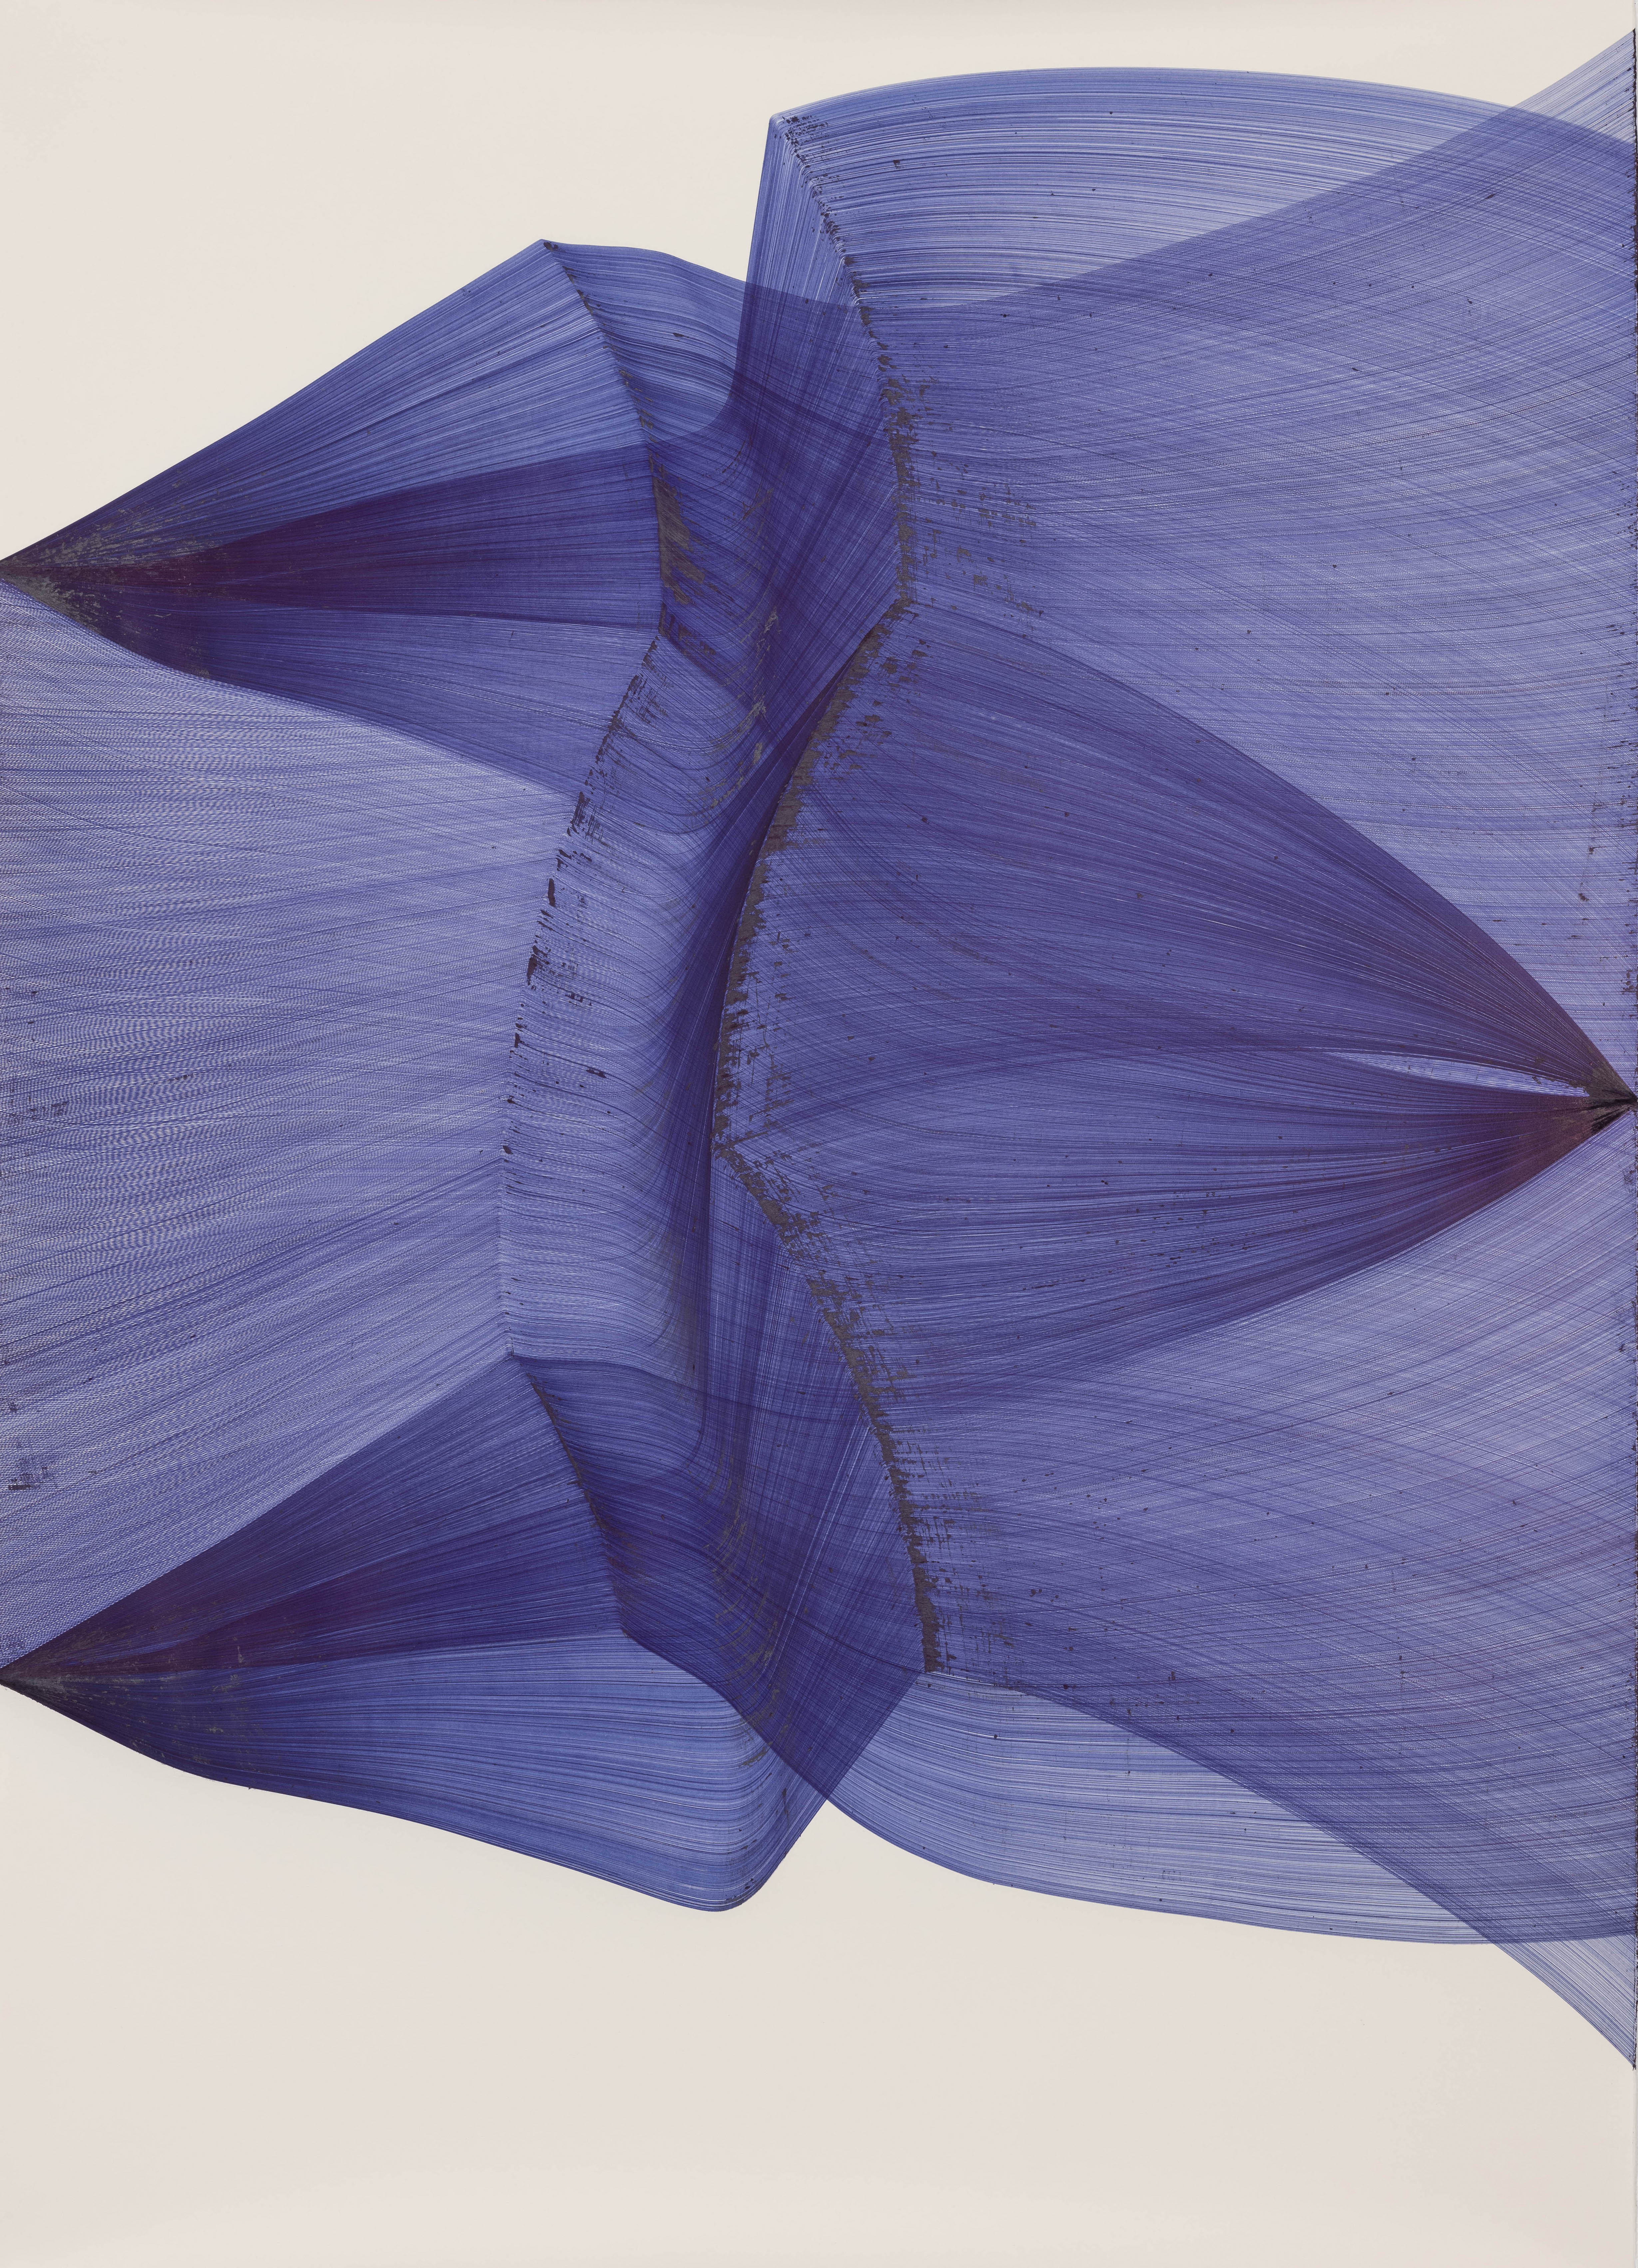 Thomas Müller, Untitled (PH 591), Ballpoint pen on Fabriano paper, 196 x 140 cm, 2023